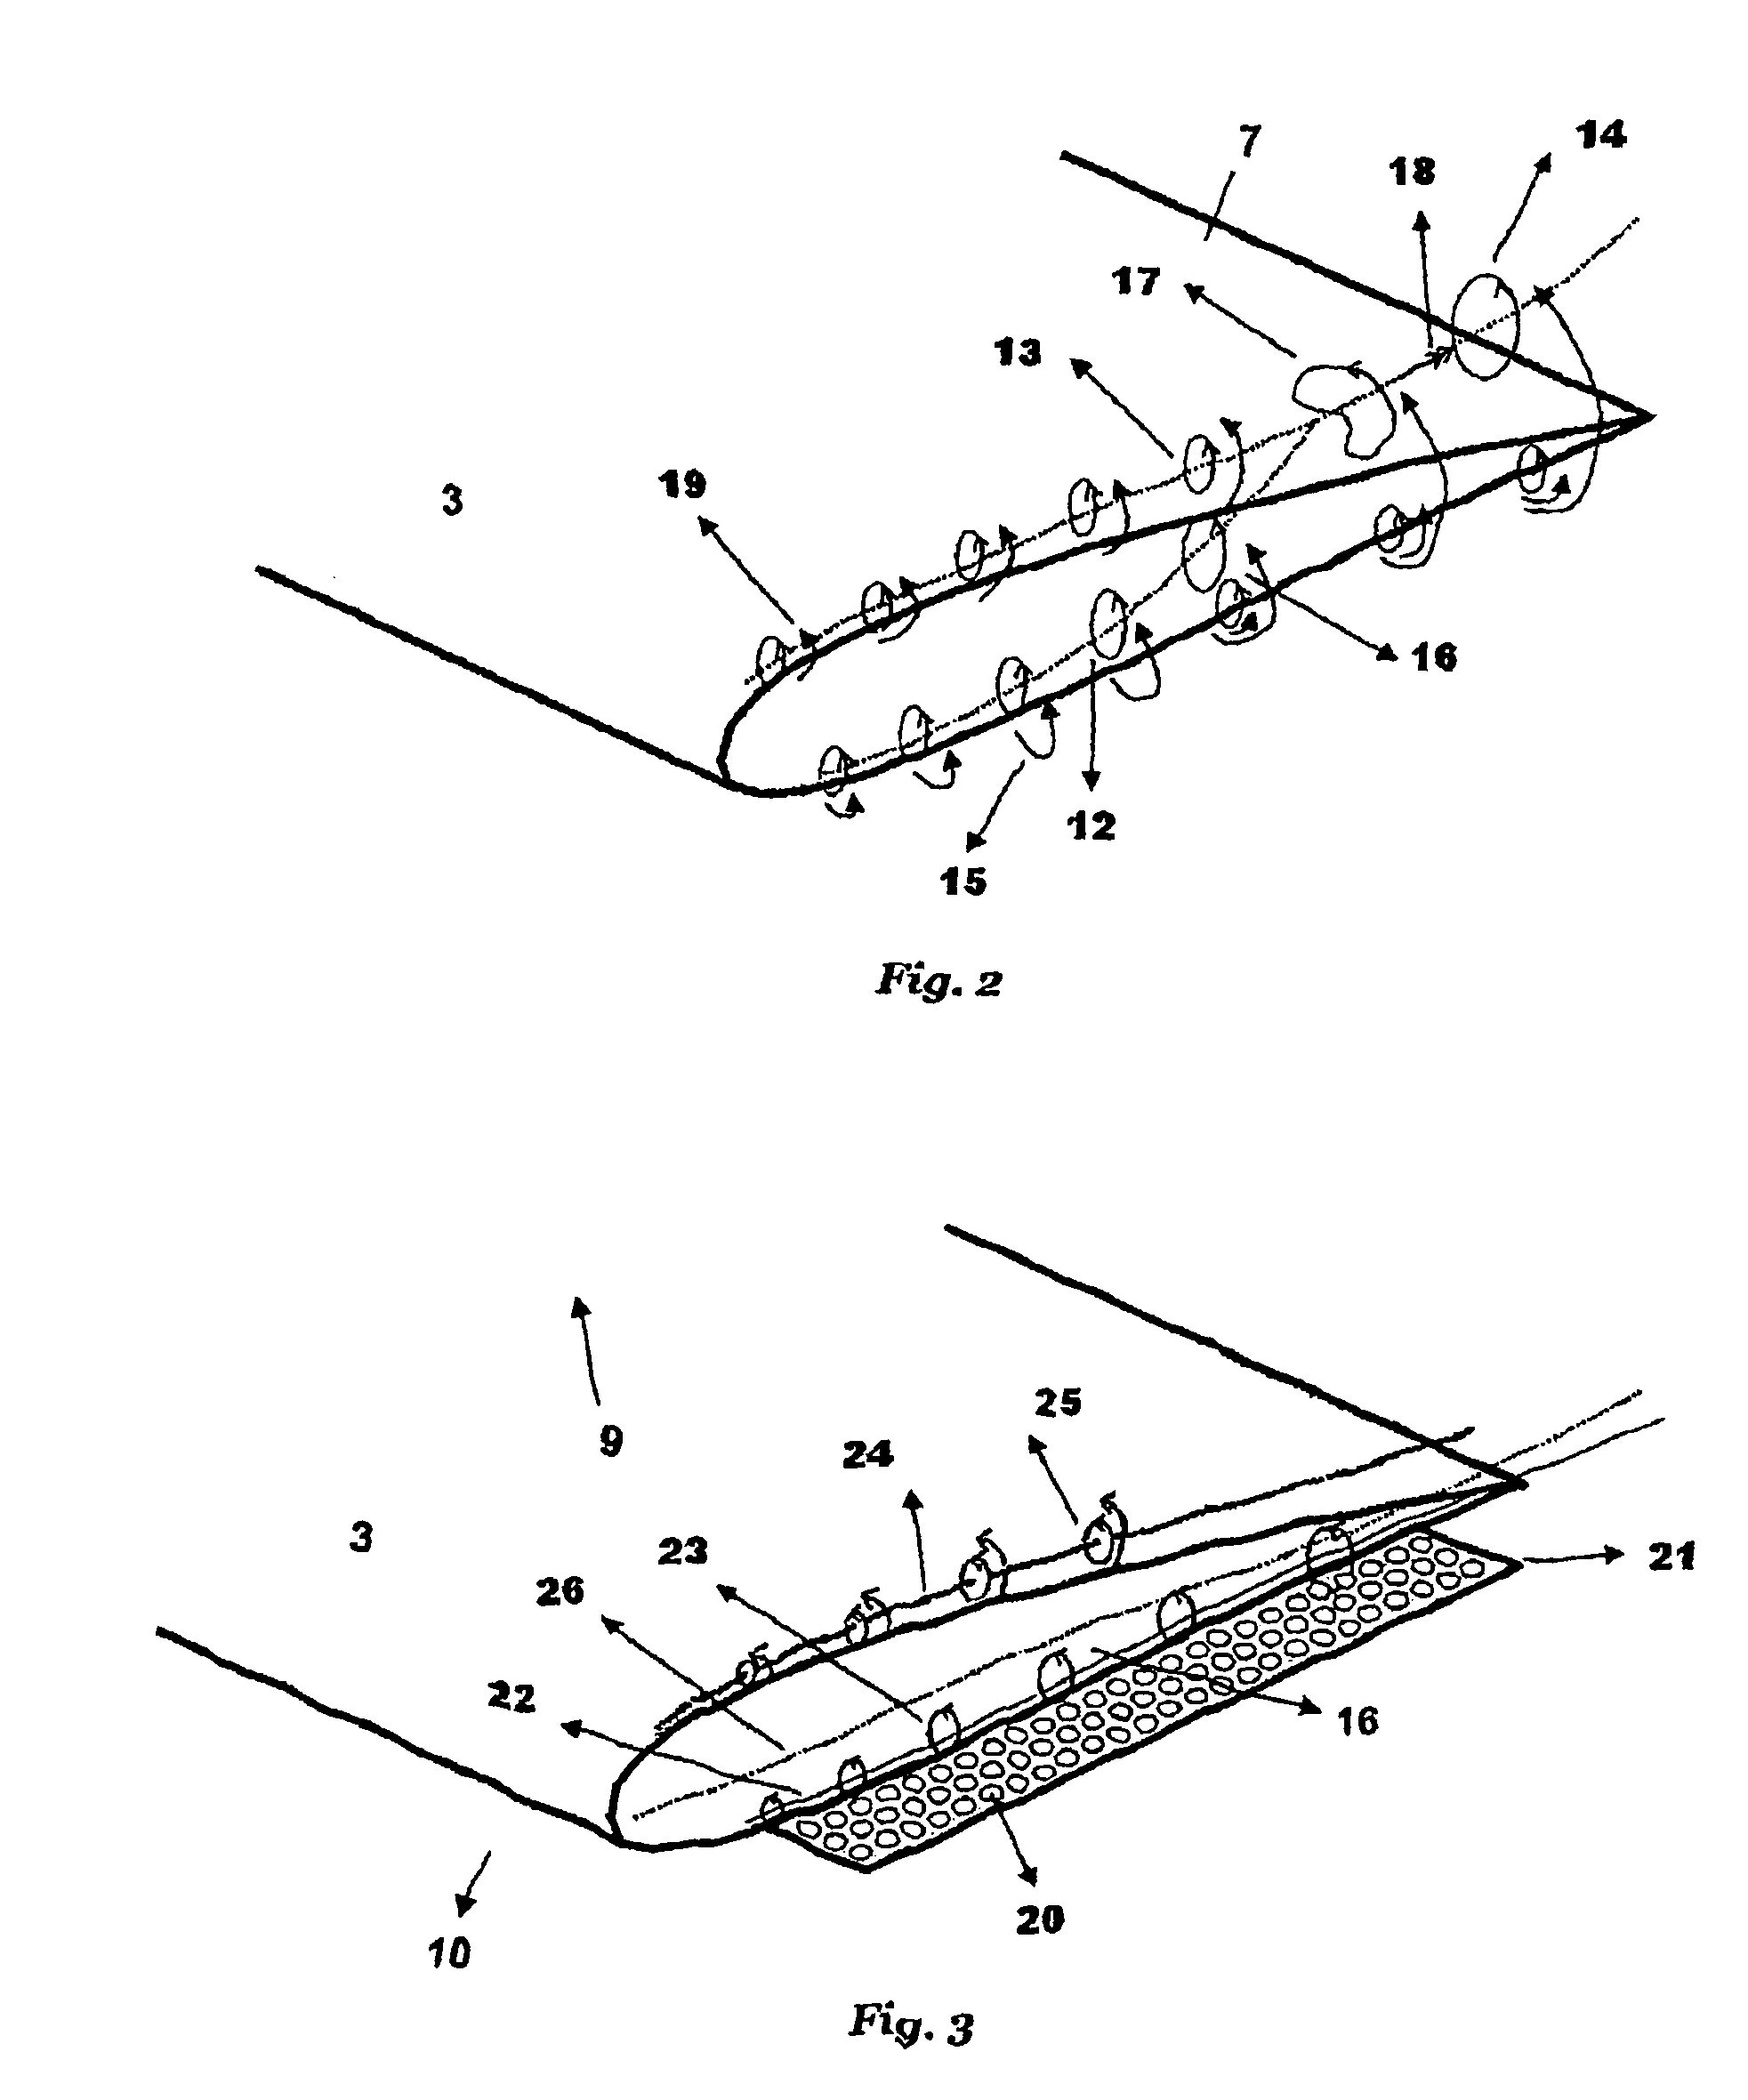 Aircraft provided with aerodynamic seal for reduction of noise generated by aircraft control surfaces